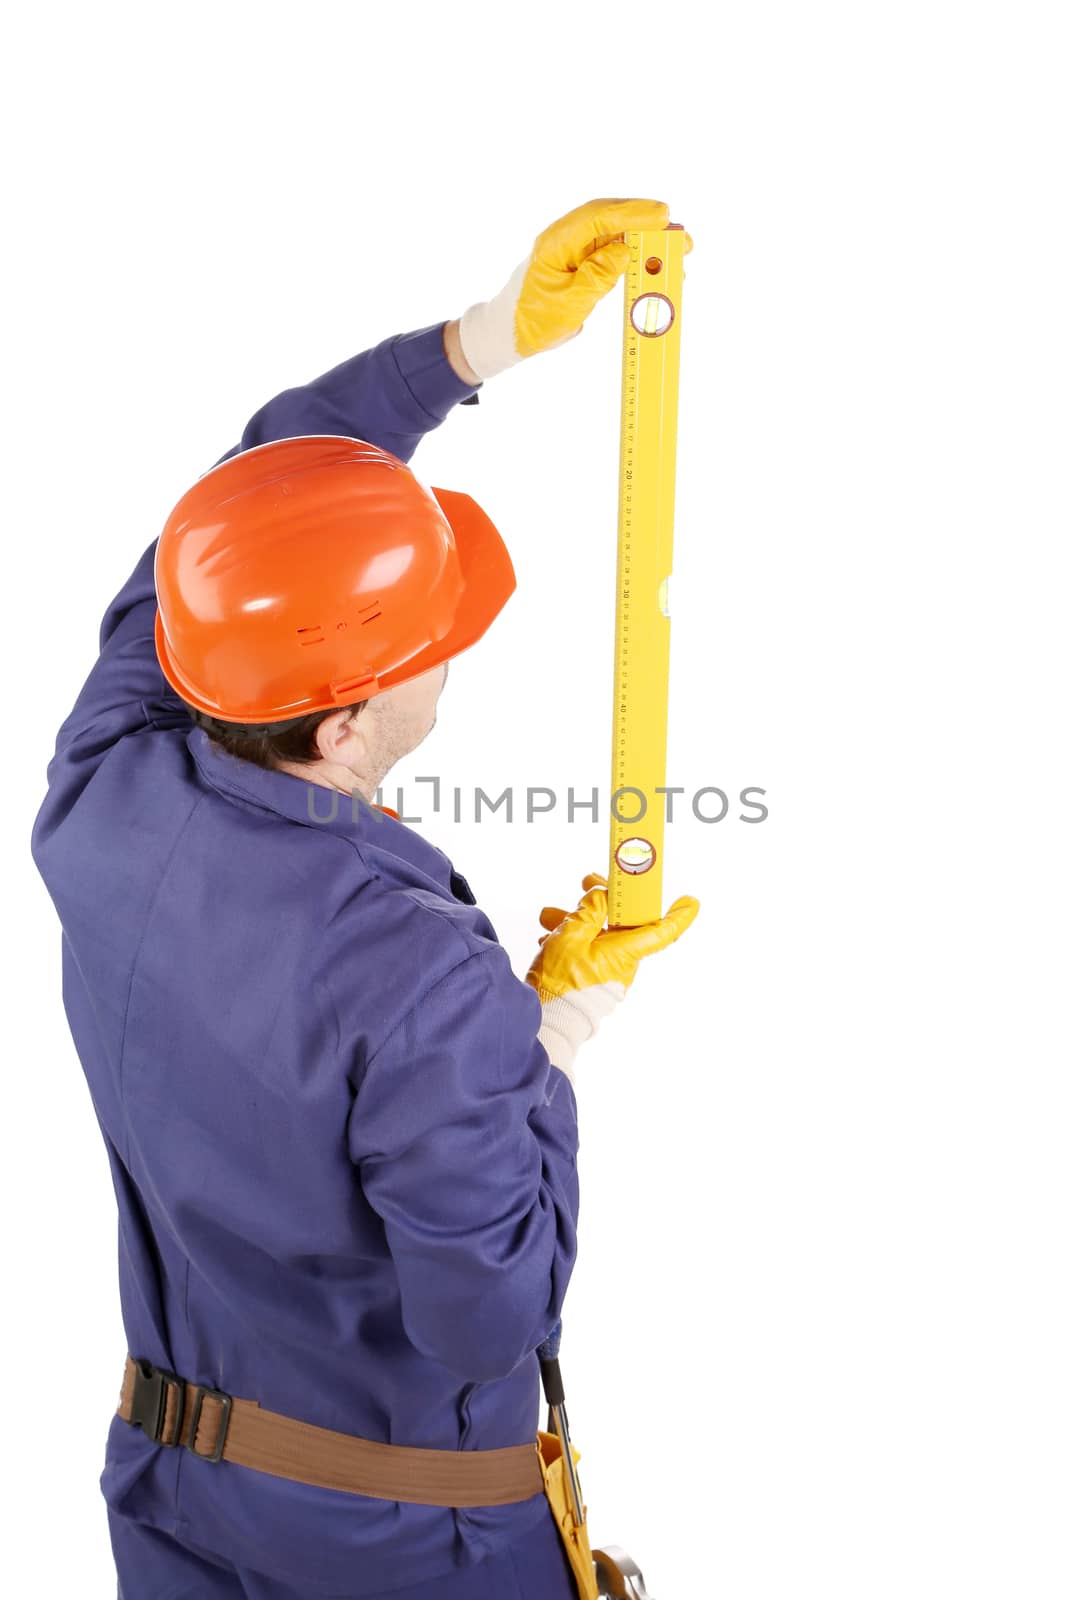 Worker in hard hat raising ruler. Isolated on a white background.